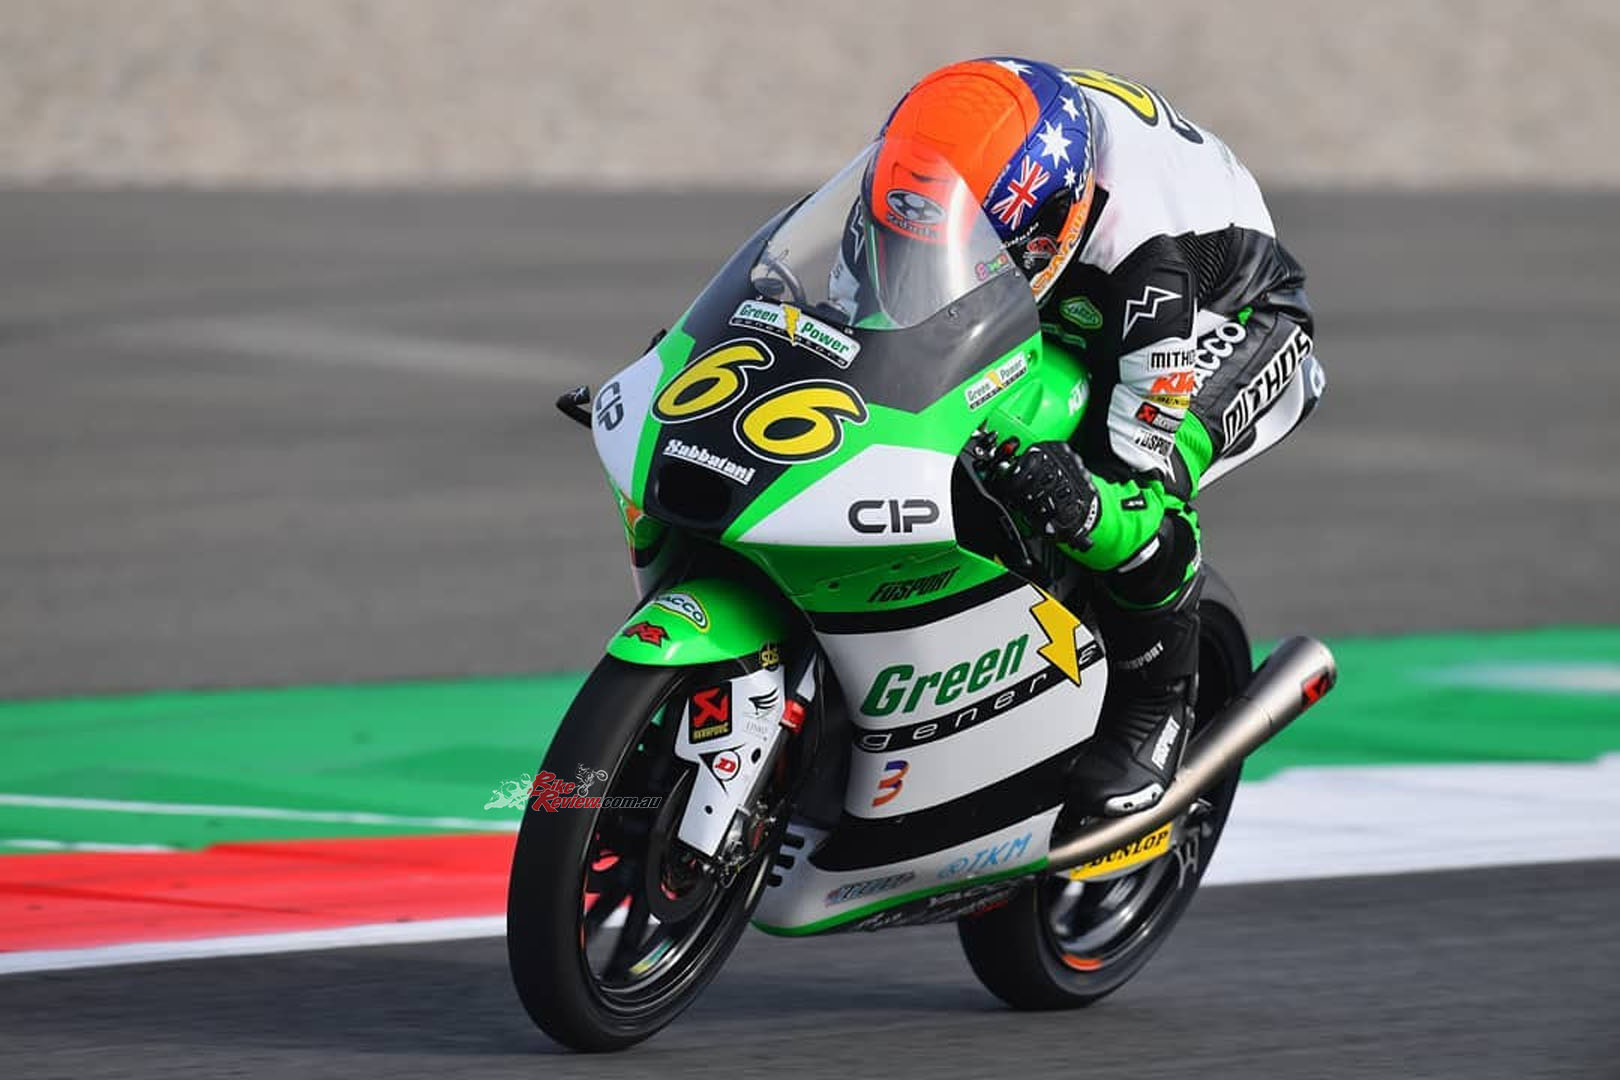 Embarking on his first full campaign in Moto3, rookie Joel Kelso has shown some flashes of quality in what's a highly competitive and combative class.